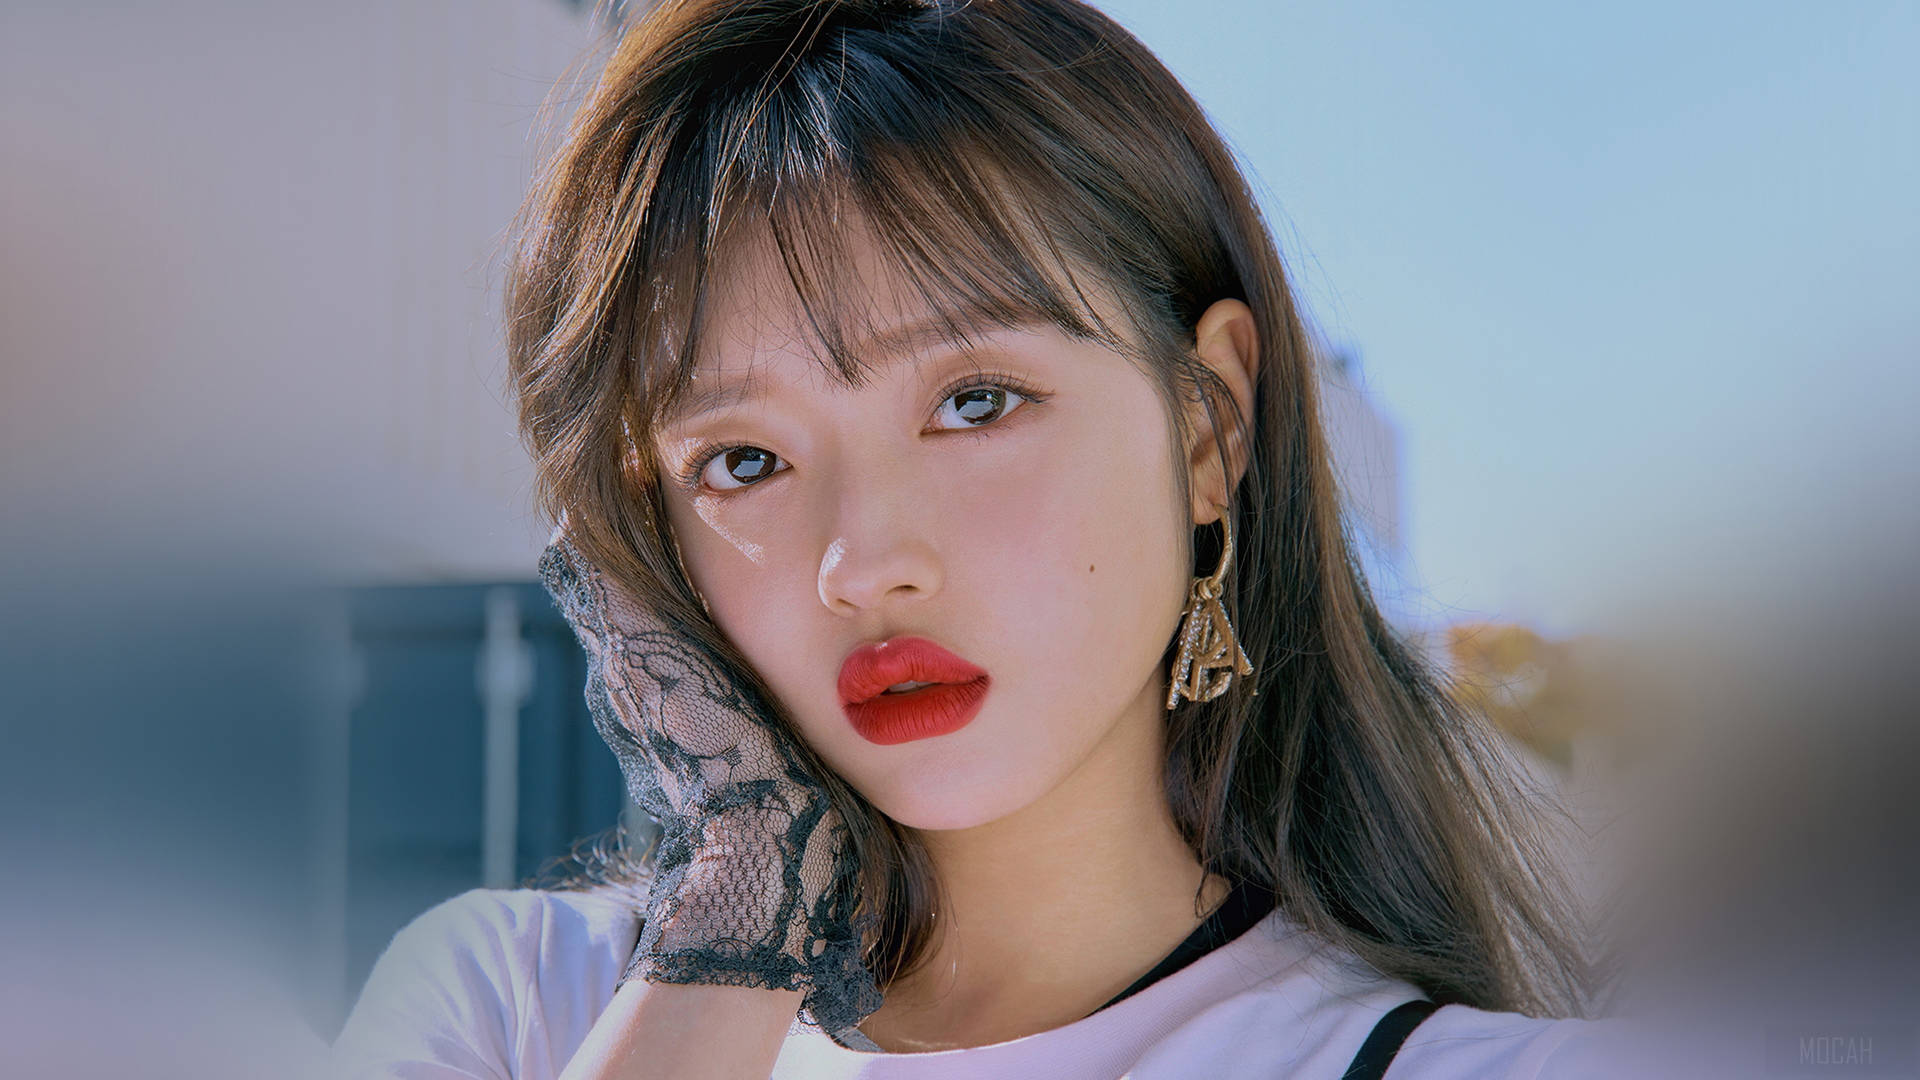 Elegance Redefined - Oh My Girl's Yooa in Red Lips Wallpaper